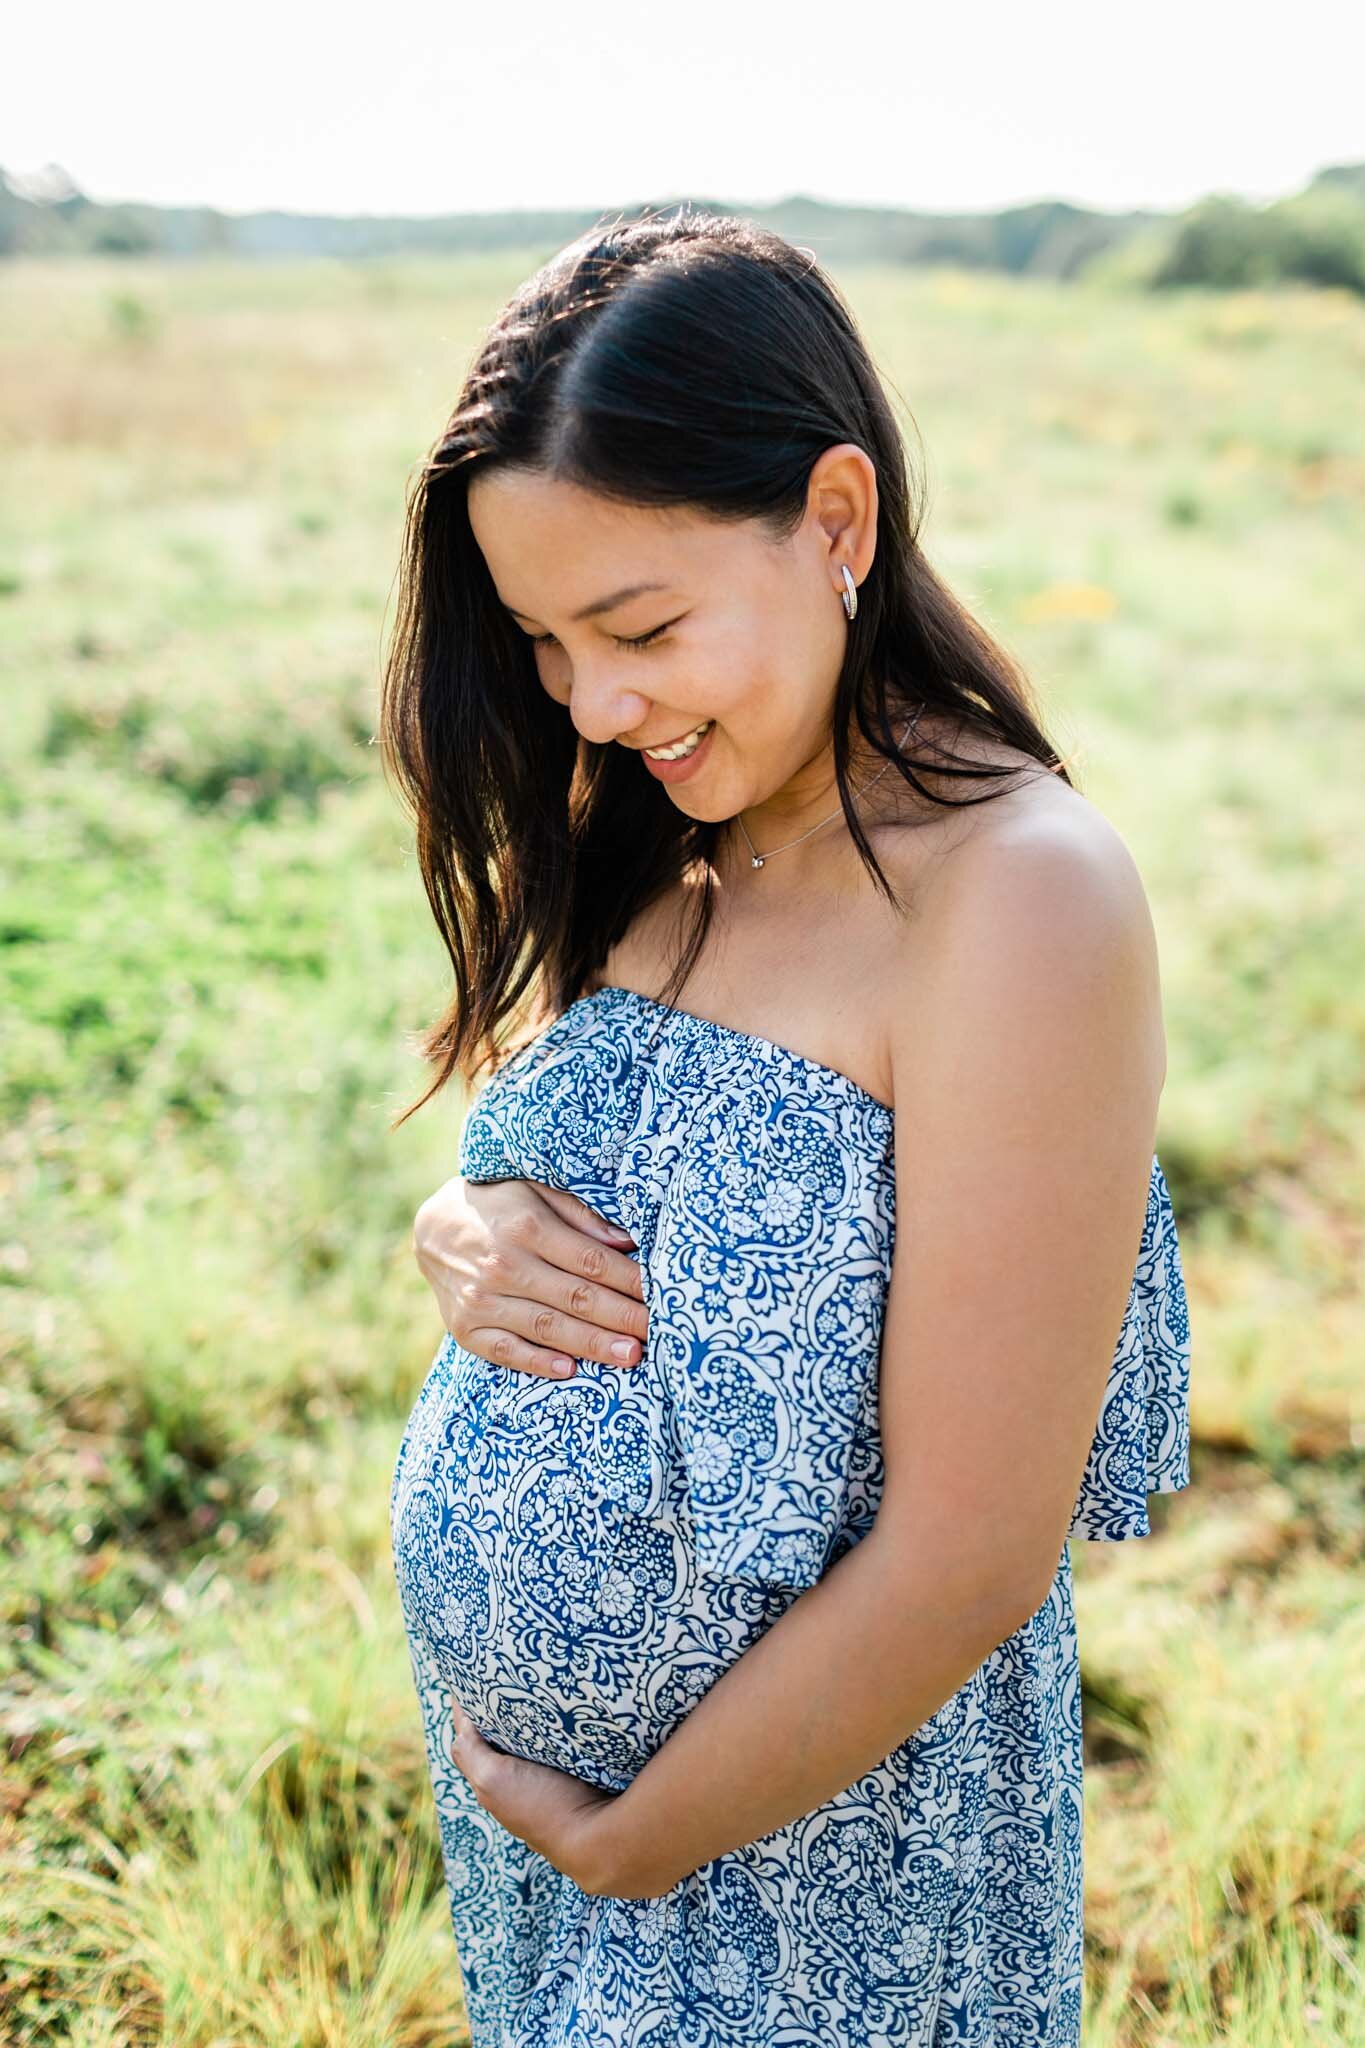 Raleigh Maternity Photographer | By G. Lin Photography | NCMA Maternity Photos | Pregnant woman smiling and standing in open field